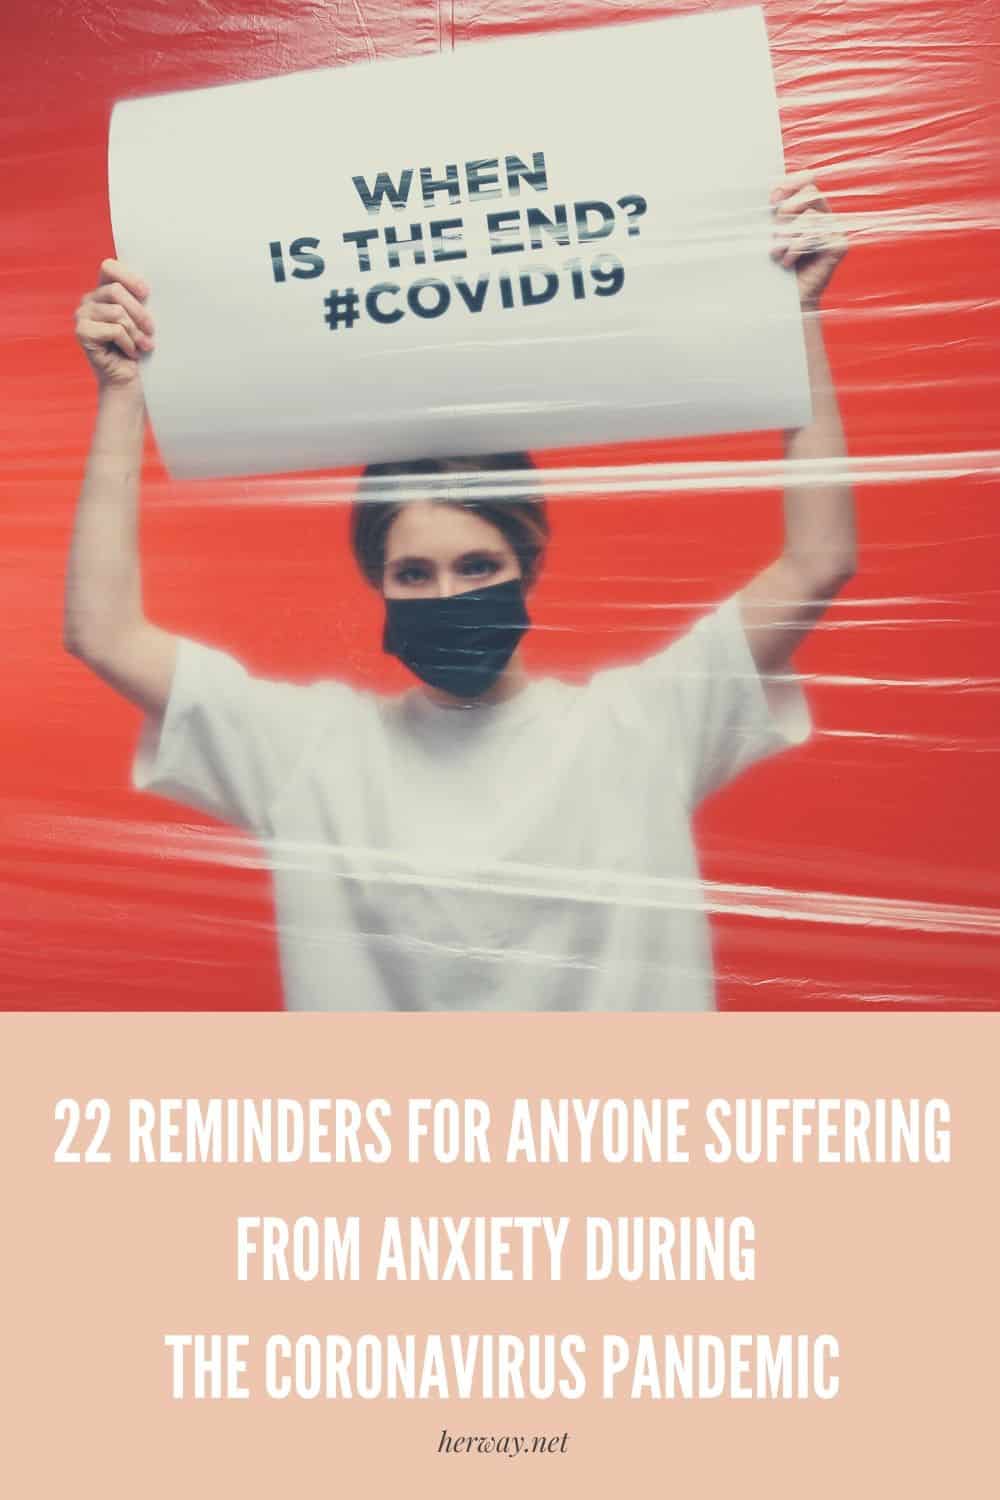 22 Reminders For Anyone Suffering From Anxiety During The Coronavirus Pandemic